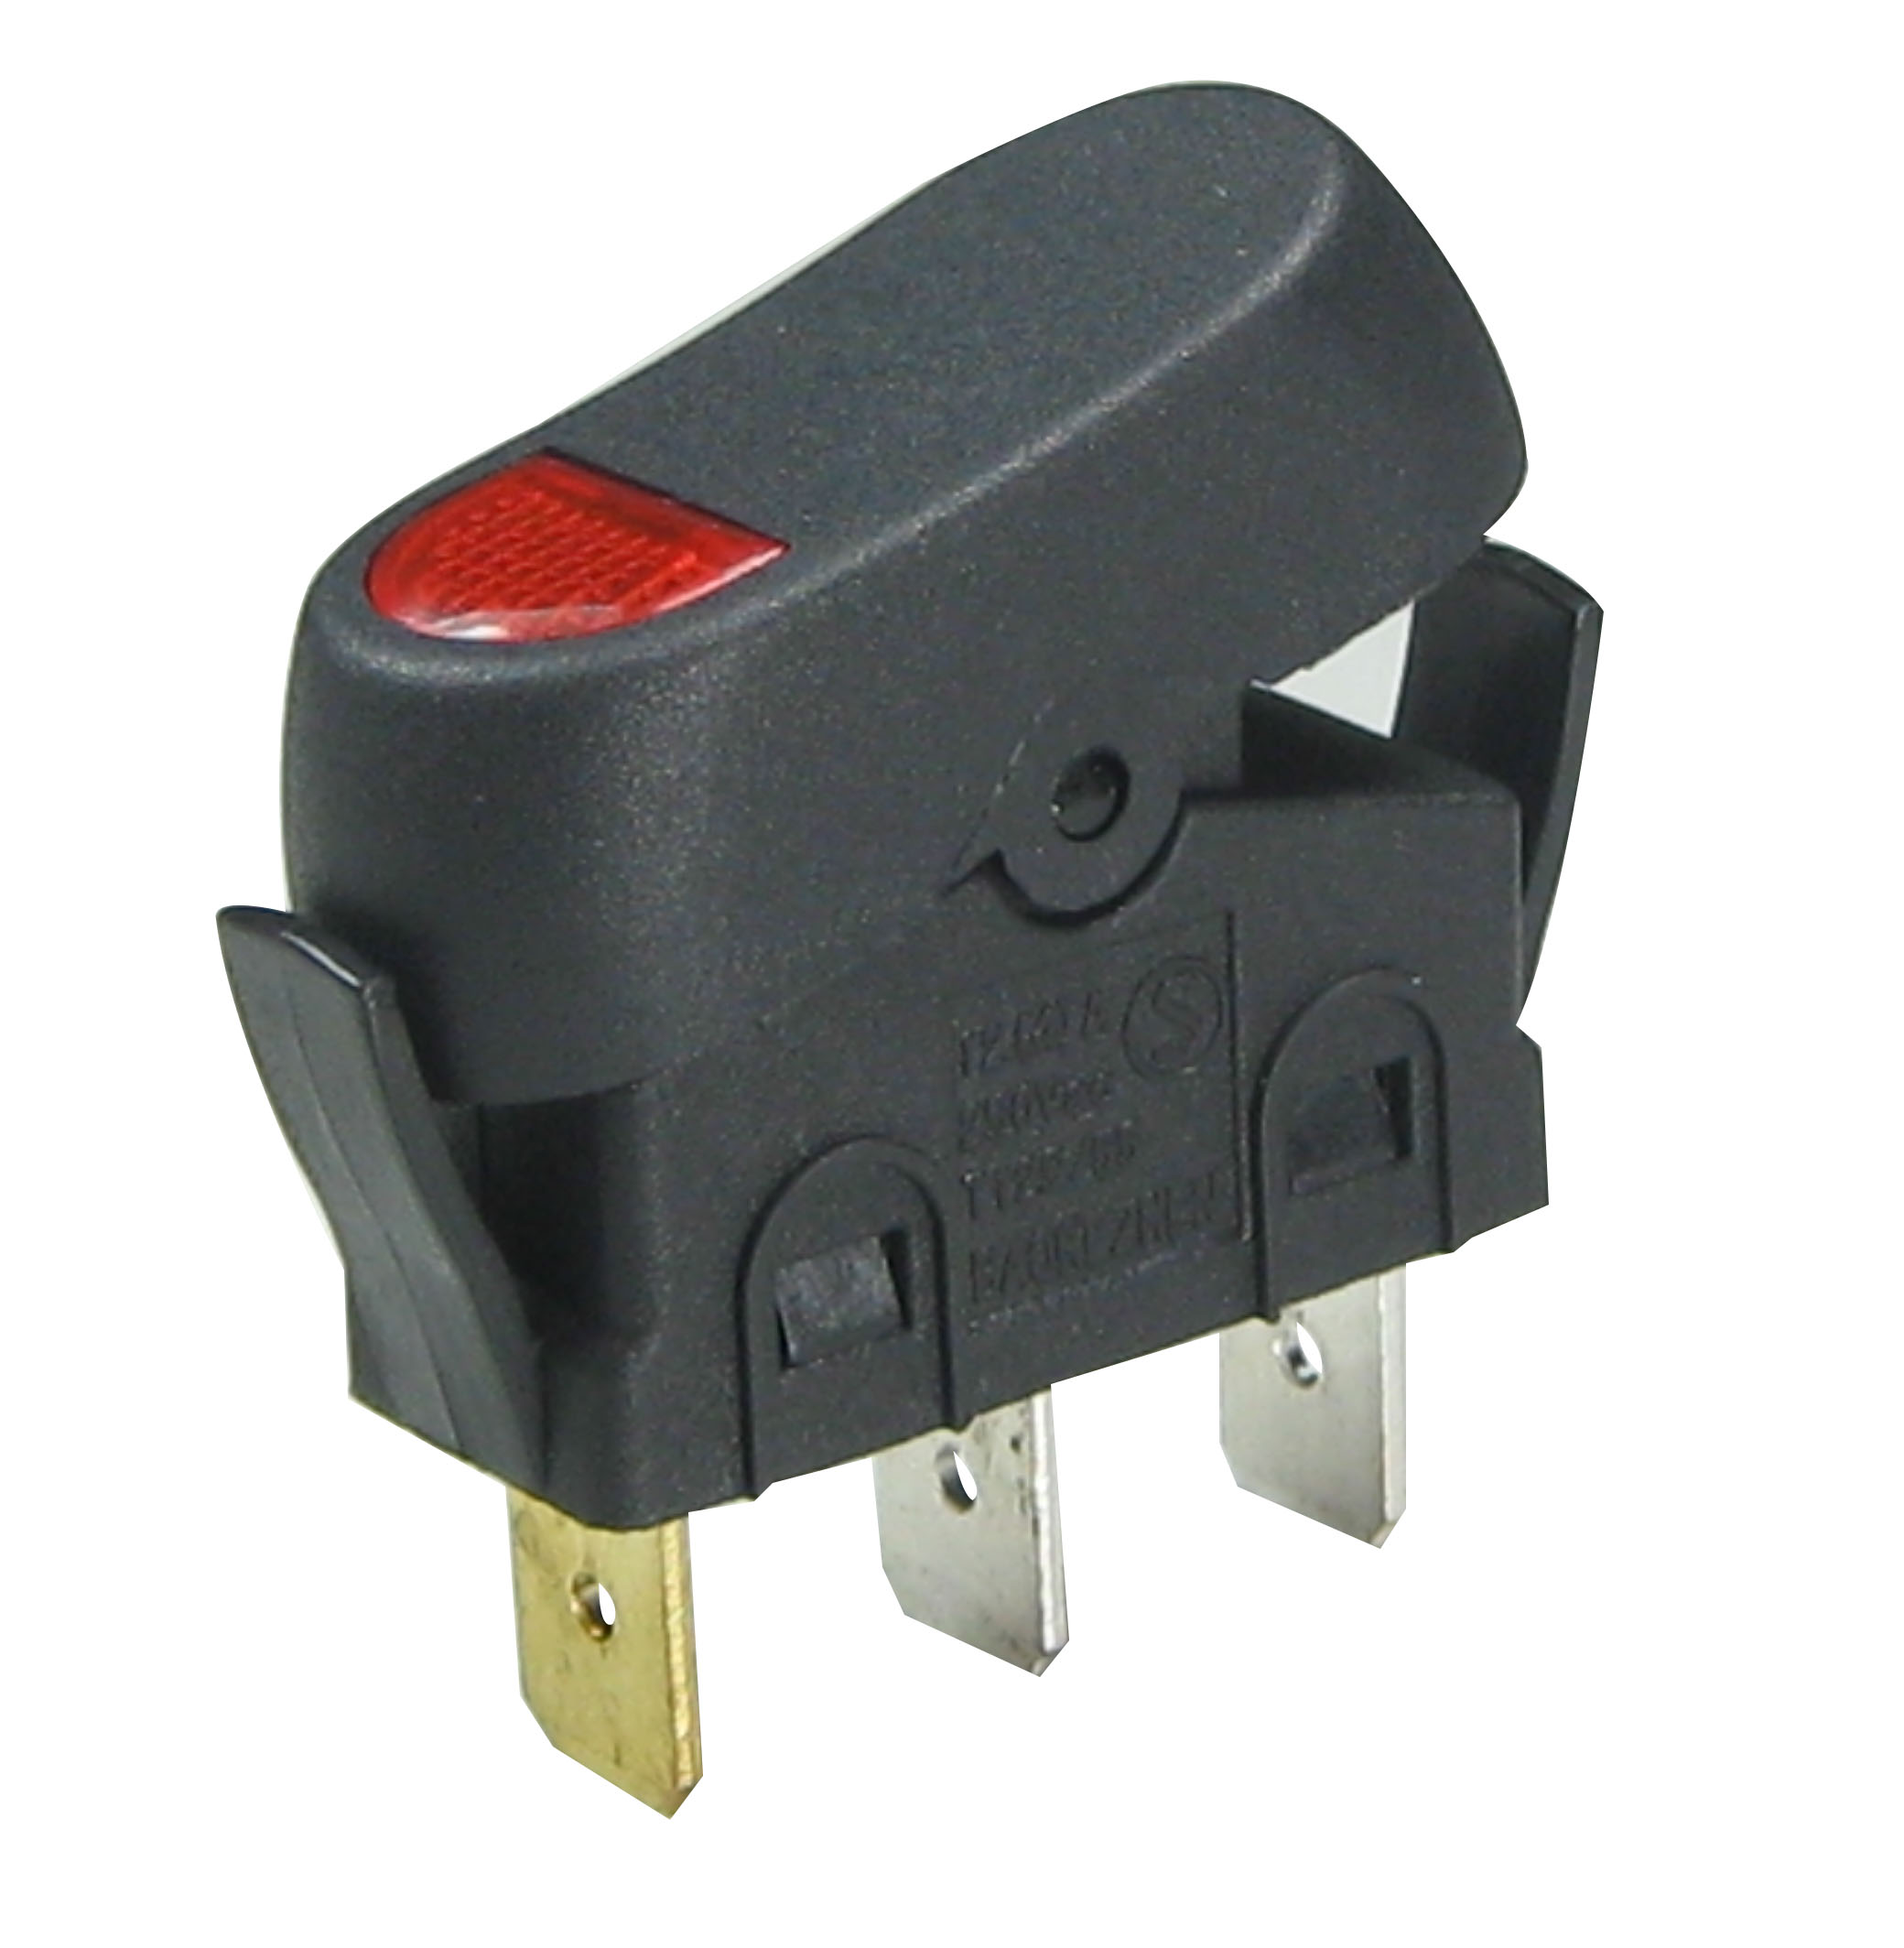 SC765 baokezhen switch, SPST On / off 2pins ,on/off with illuminated 3 Pins  Rocker Switch 